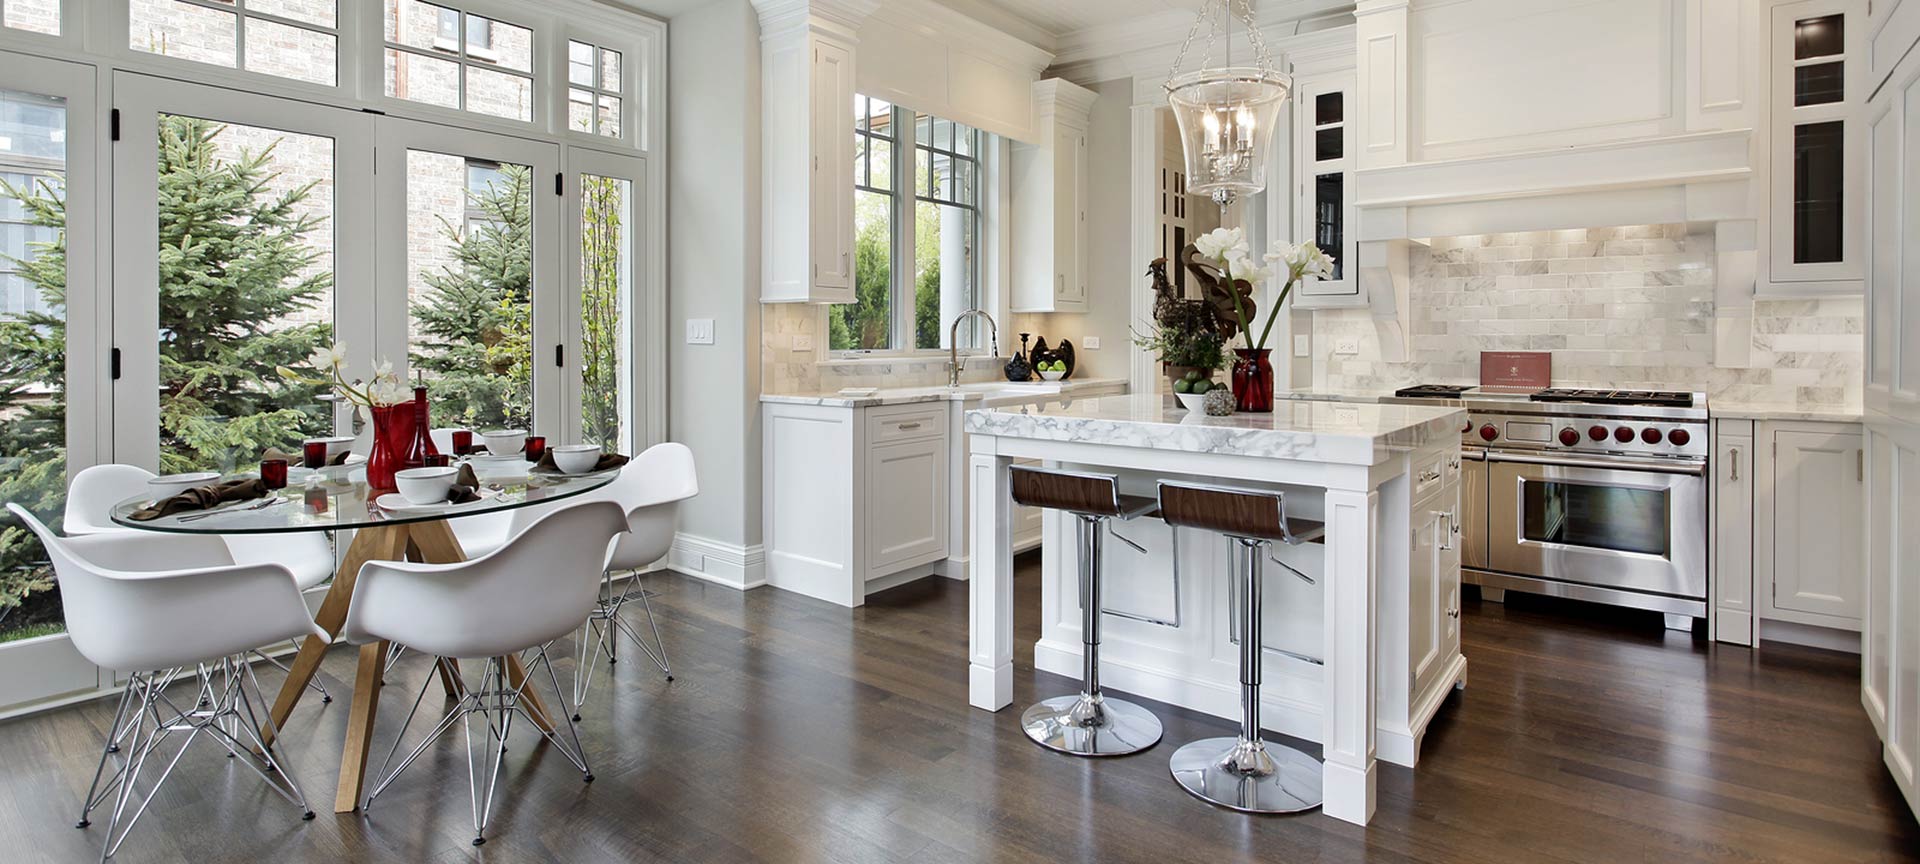 Kitchen Transformations: Unleashing the Potential of Your Home with Expert Kitchen Remodels